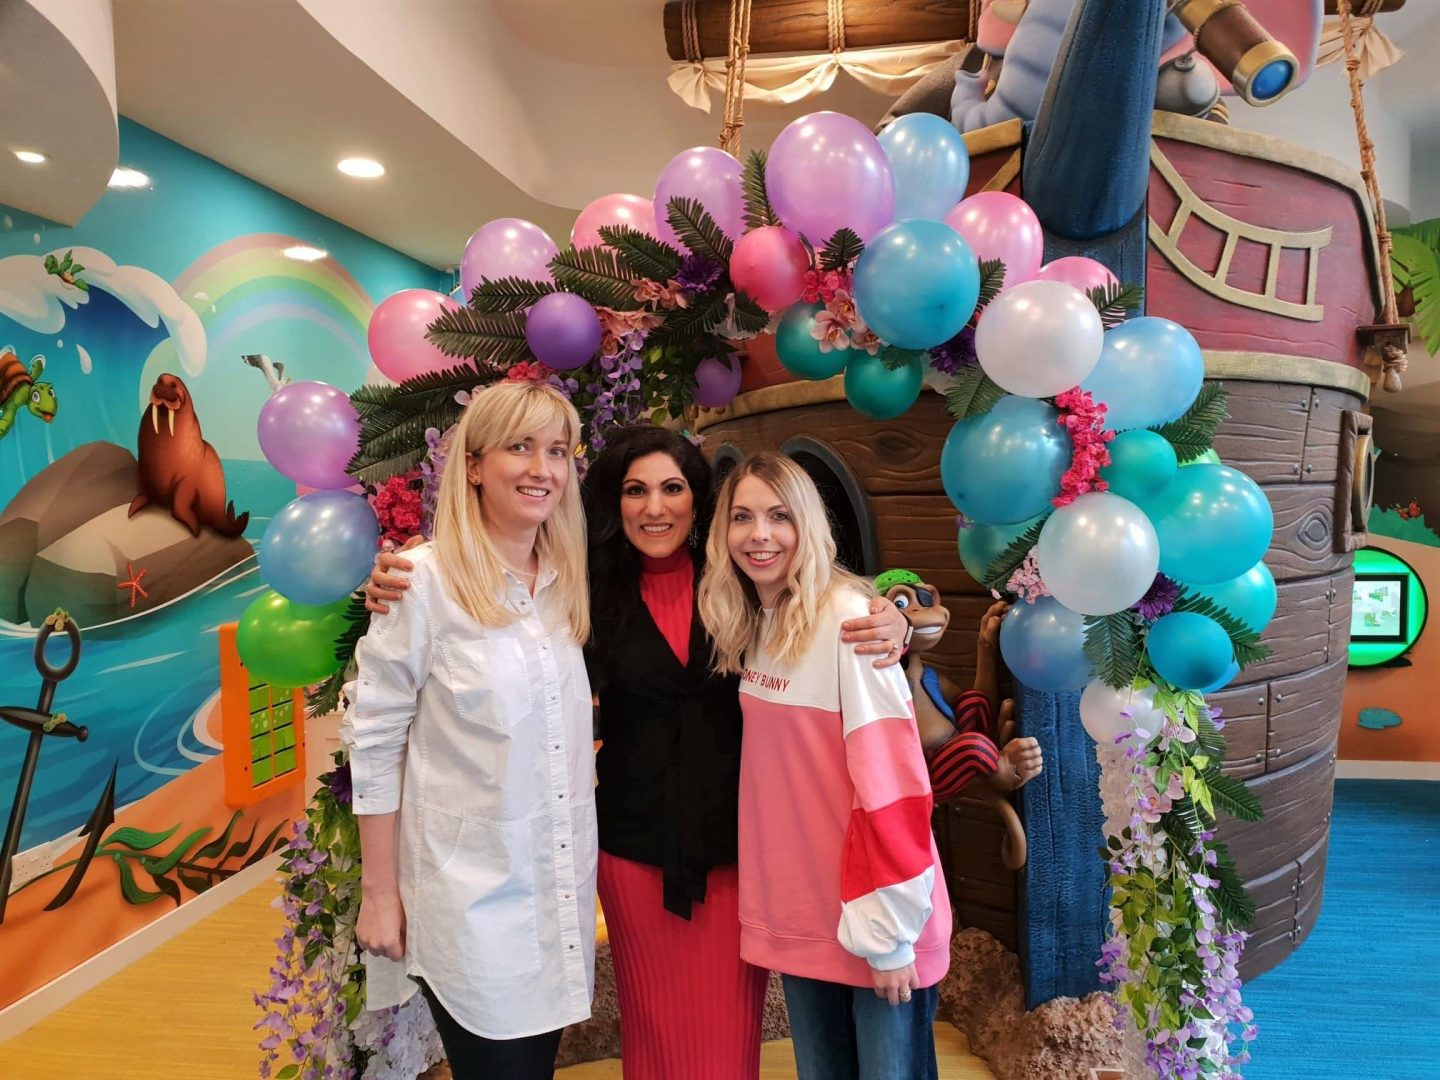 Laura Chesmer of Autumn's Mummy blog with Vicky Psarias of Honest Mum and Roksolona Mykhalus of Happy Kids Dental